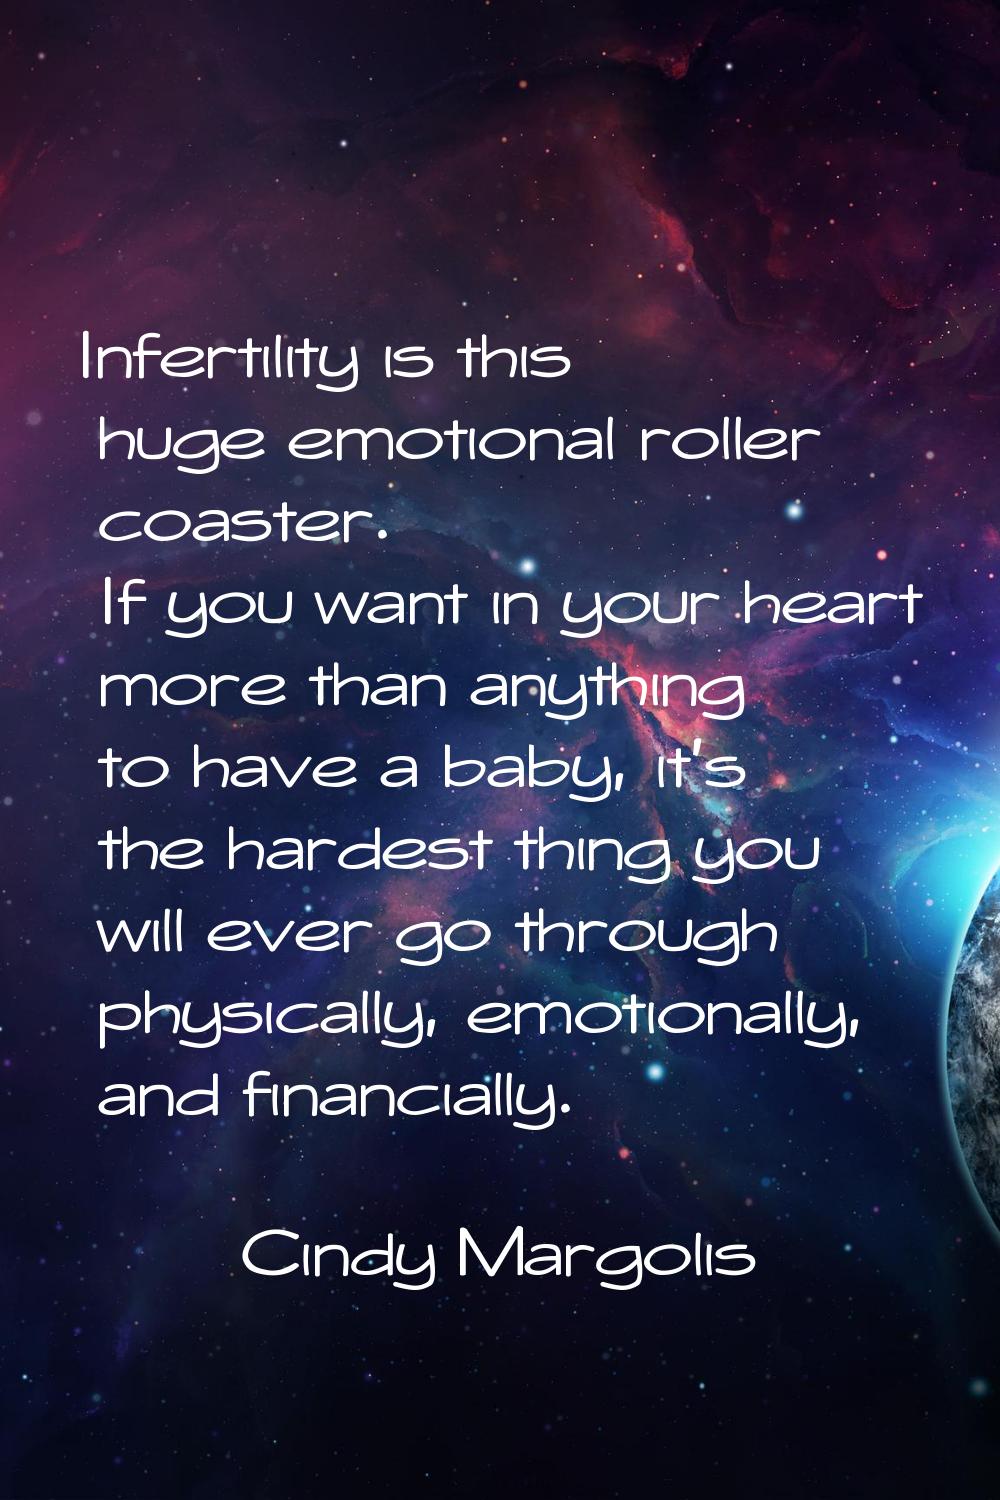 Infertility is this huge emotional roller coaster. If you want in your heart more than anything to 